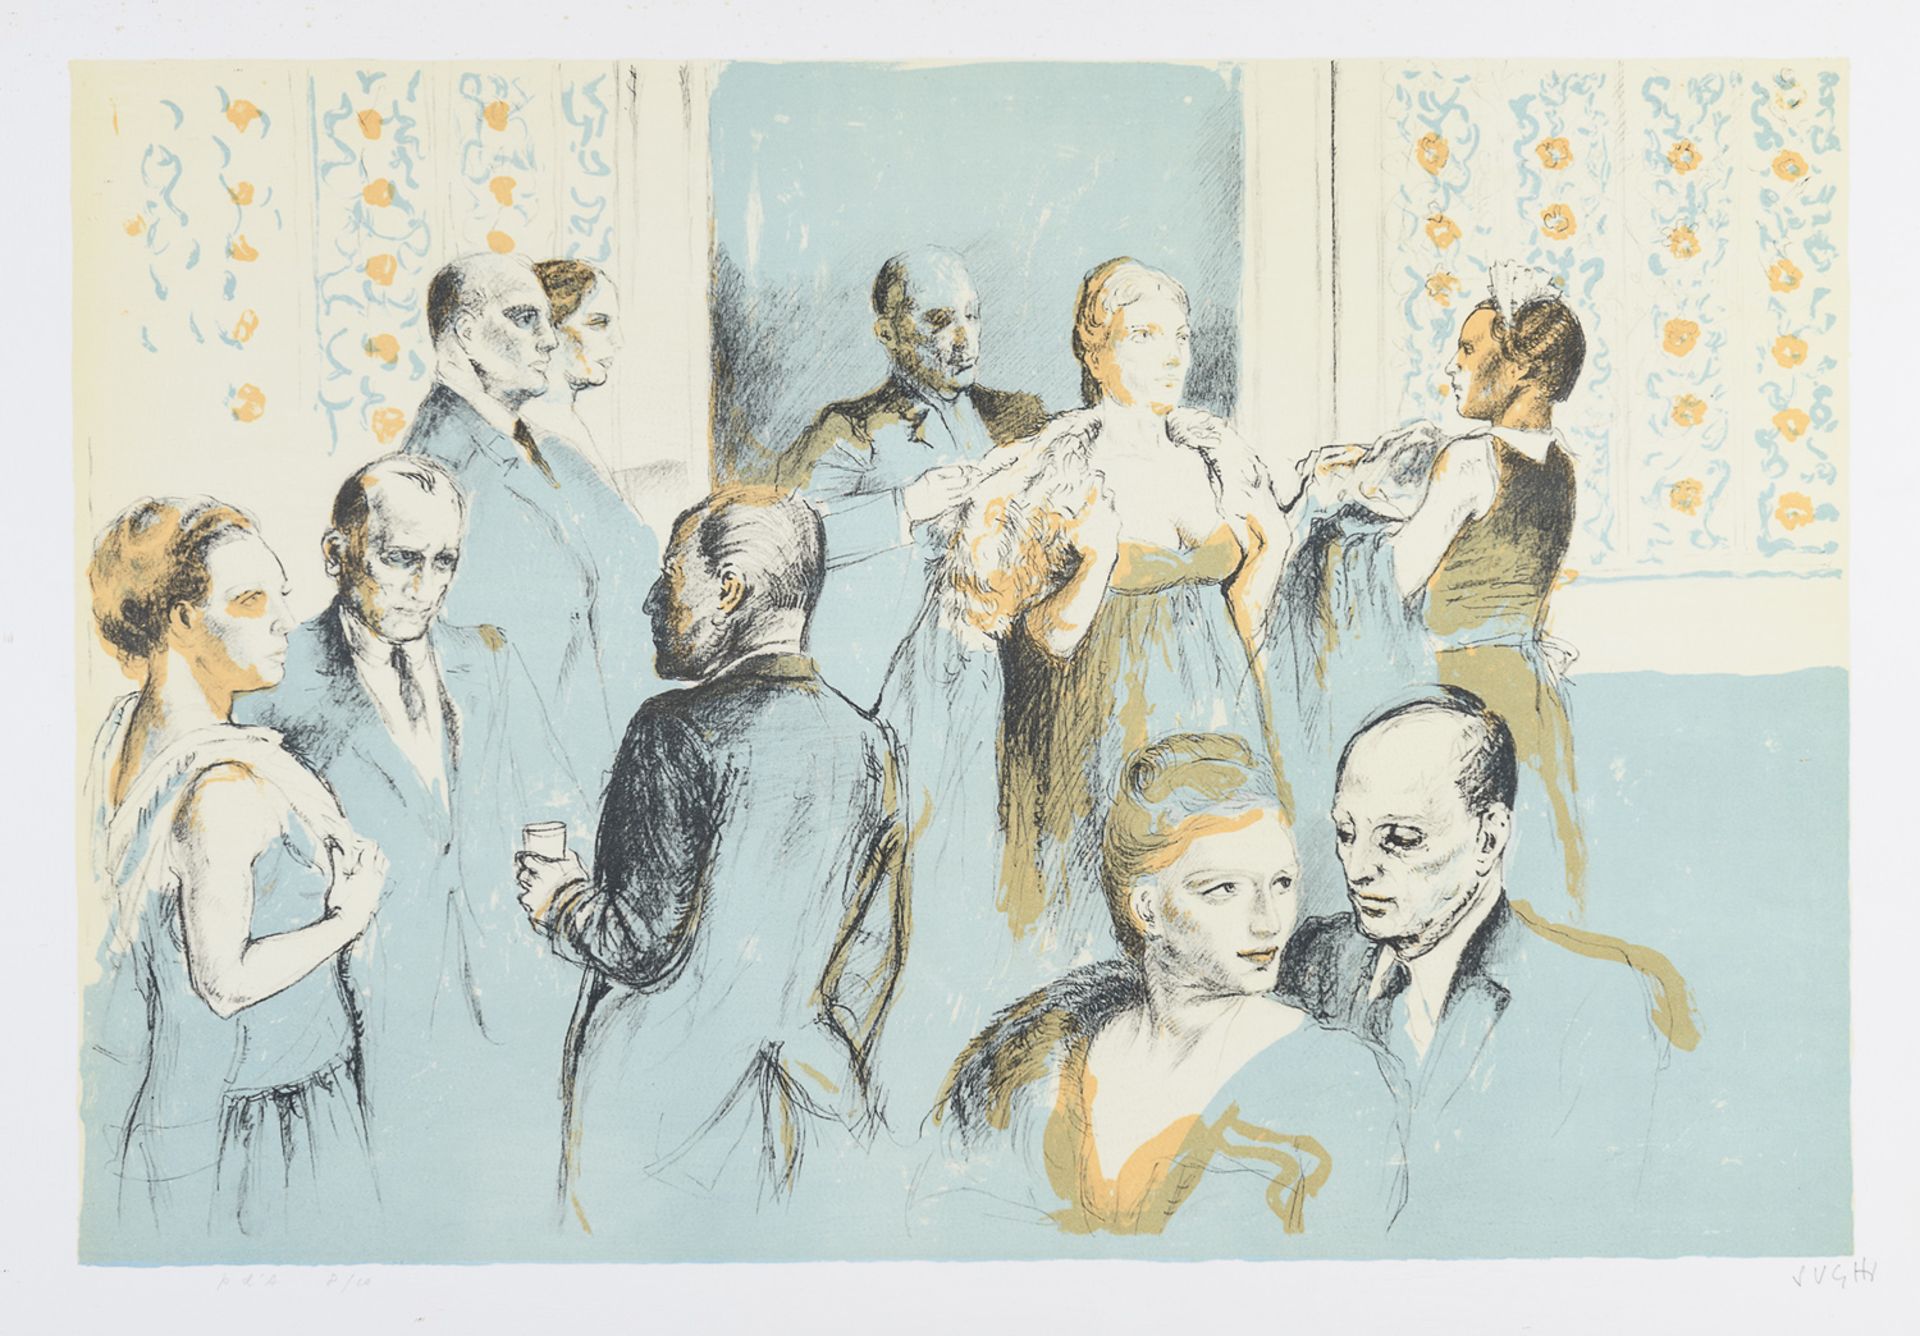 LITHOGRAPH BY ALBERTO SUGHI